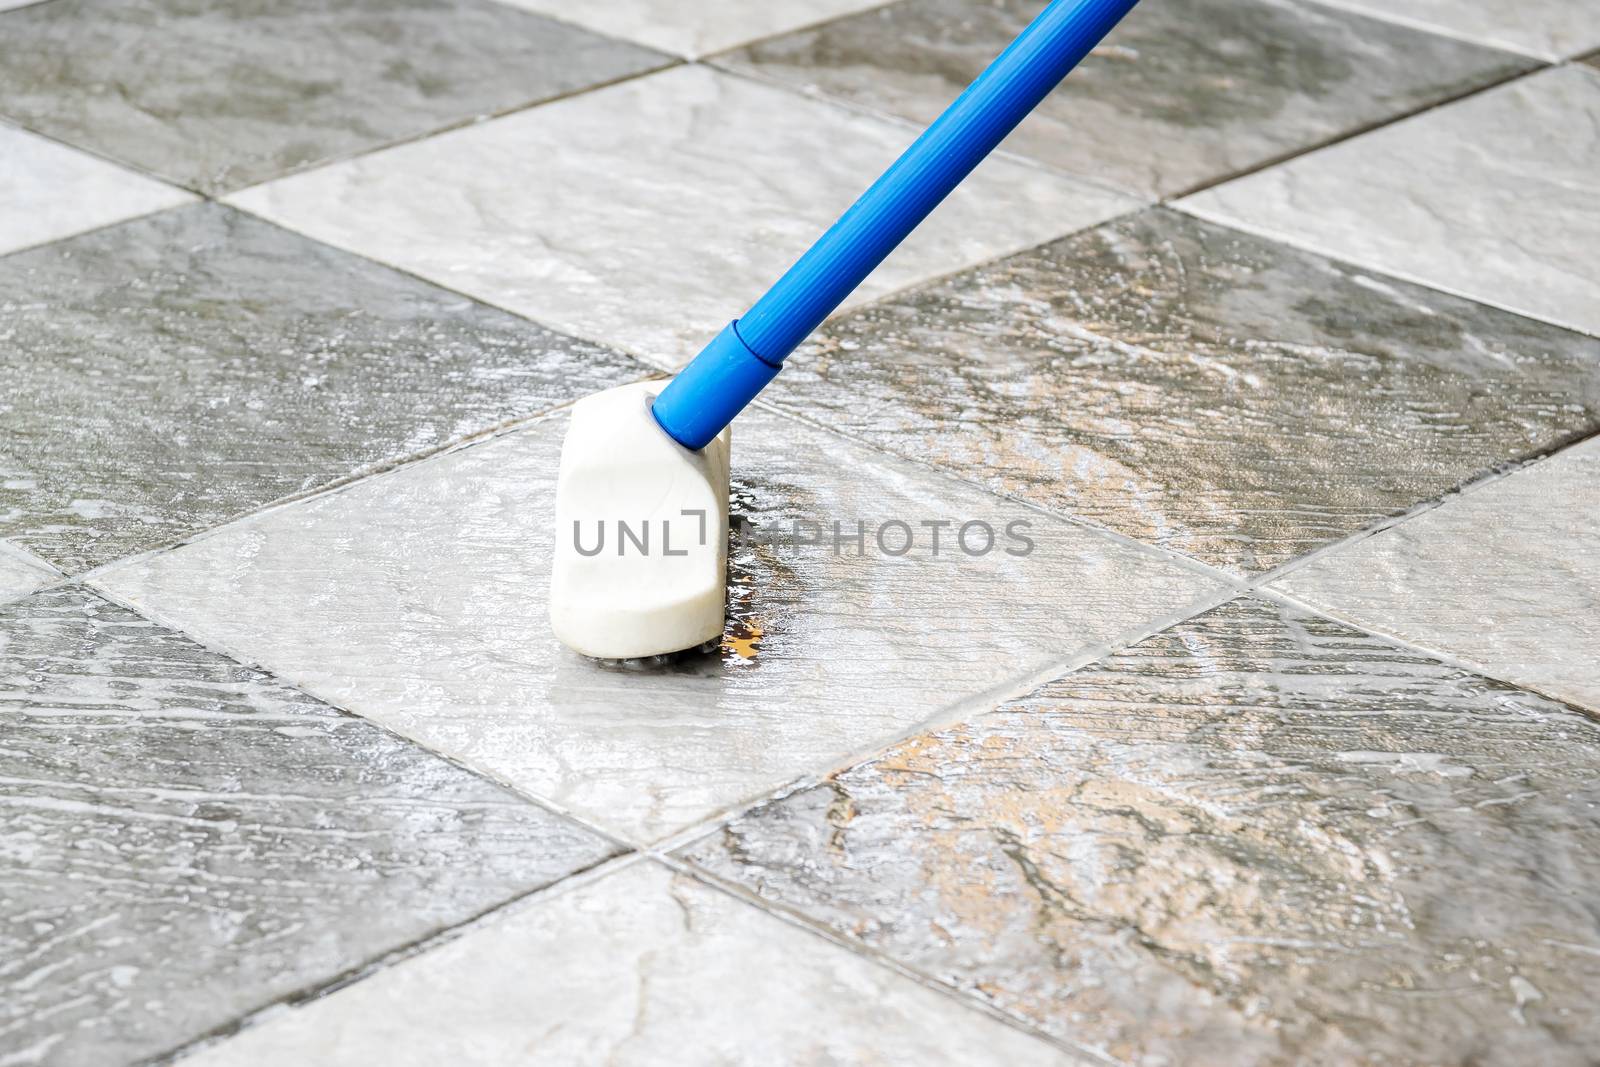 Clean the tile floor with a long-handled floor brush.